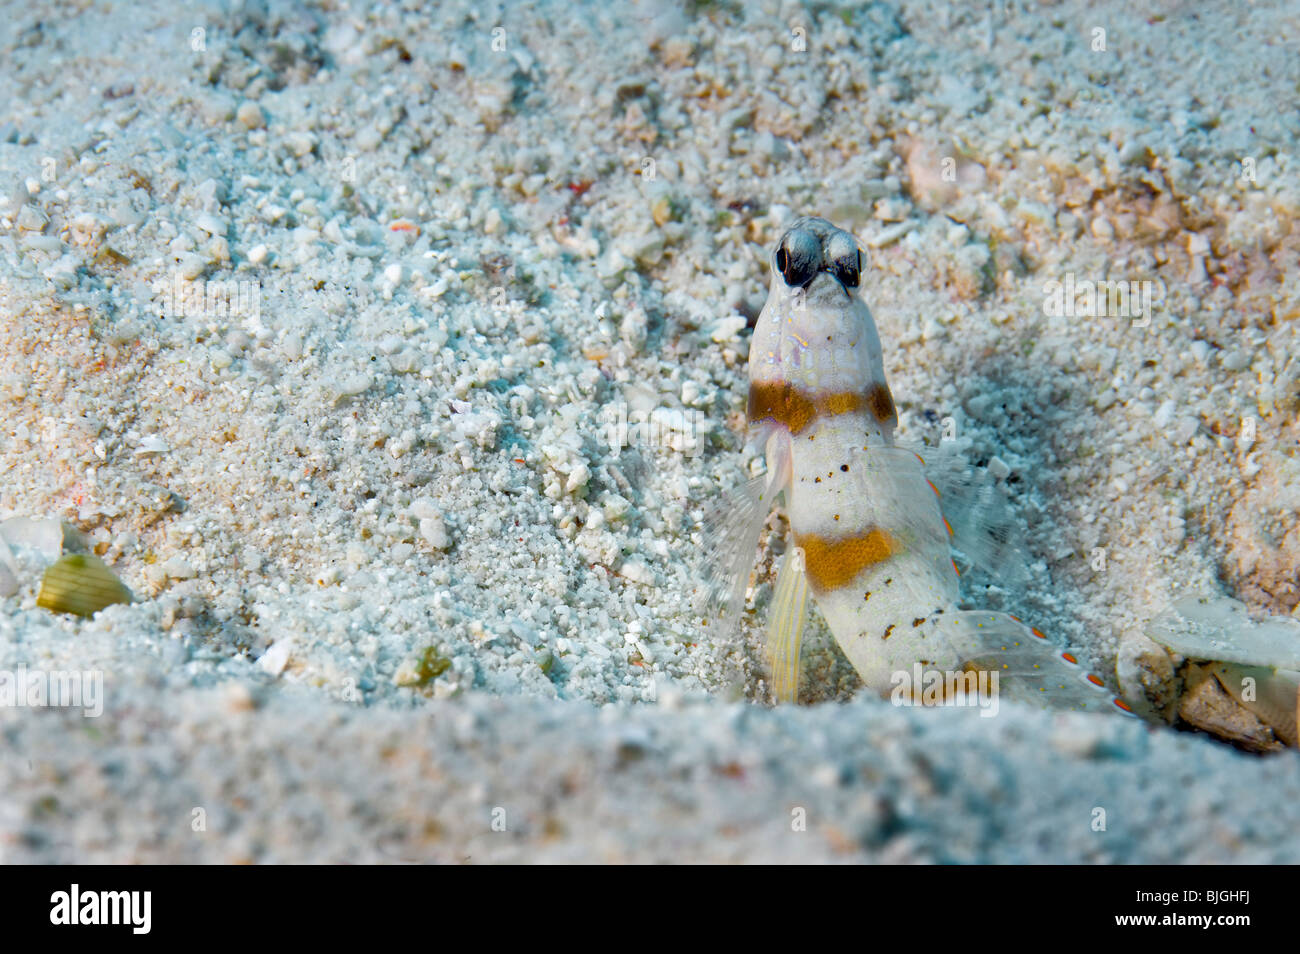 Opistognathidae underwater picture stone sand sandy fish hole  reef area construction  in sandy substrate Stock Photo